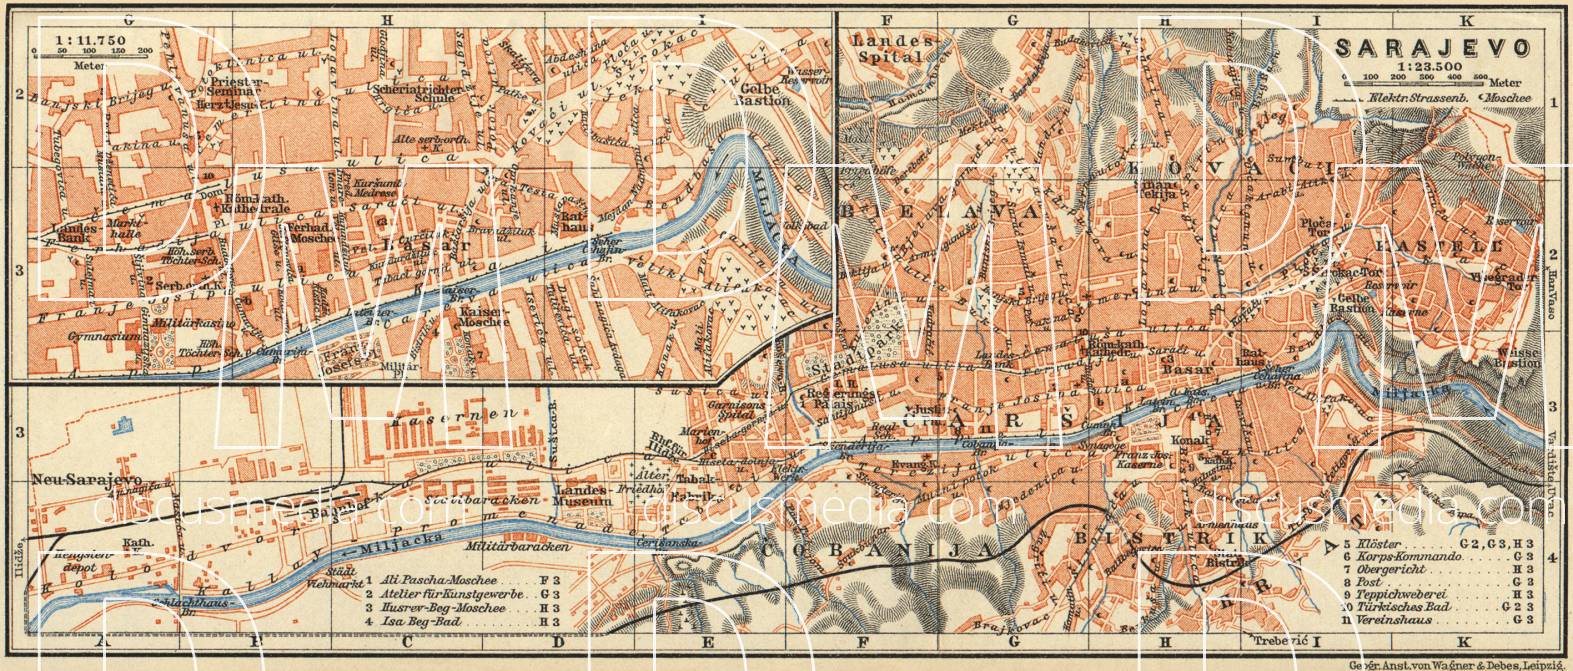 Old map of Sarajevo in 1911. Buy vintage map replica poster print or